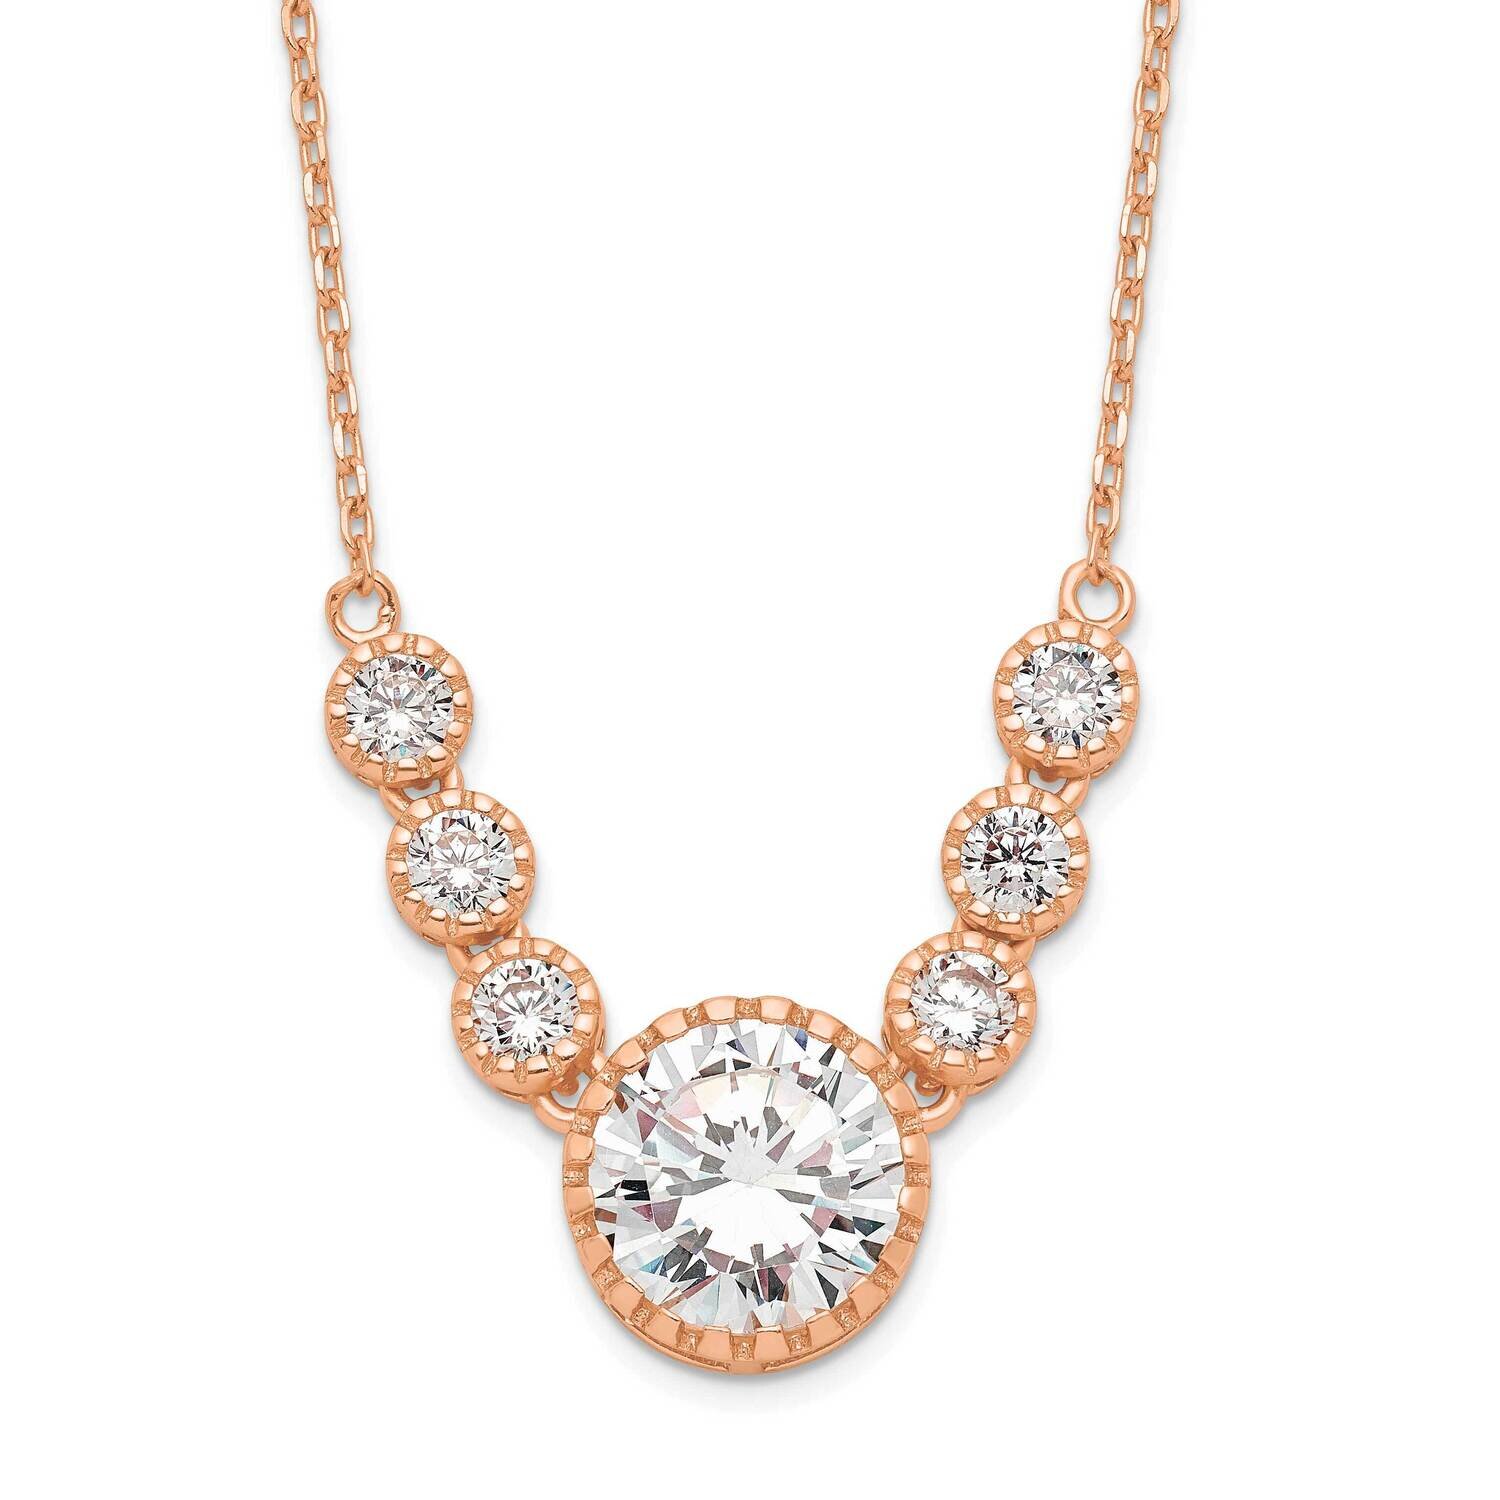 CZ Diamond with 2 In Extender Necklace 16 Inch Sterling Silver Rose-Tone QGR6144-16